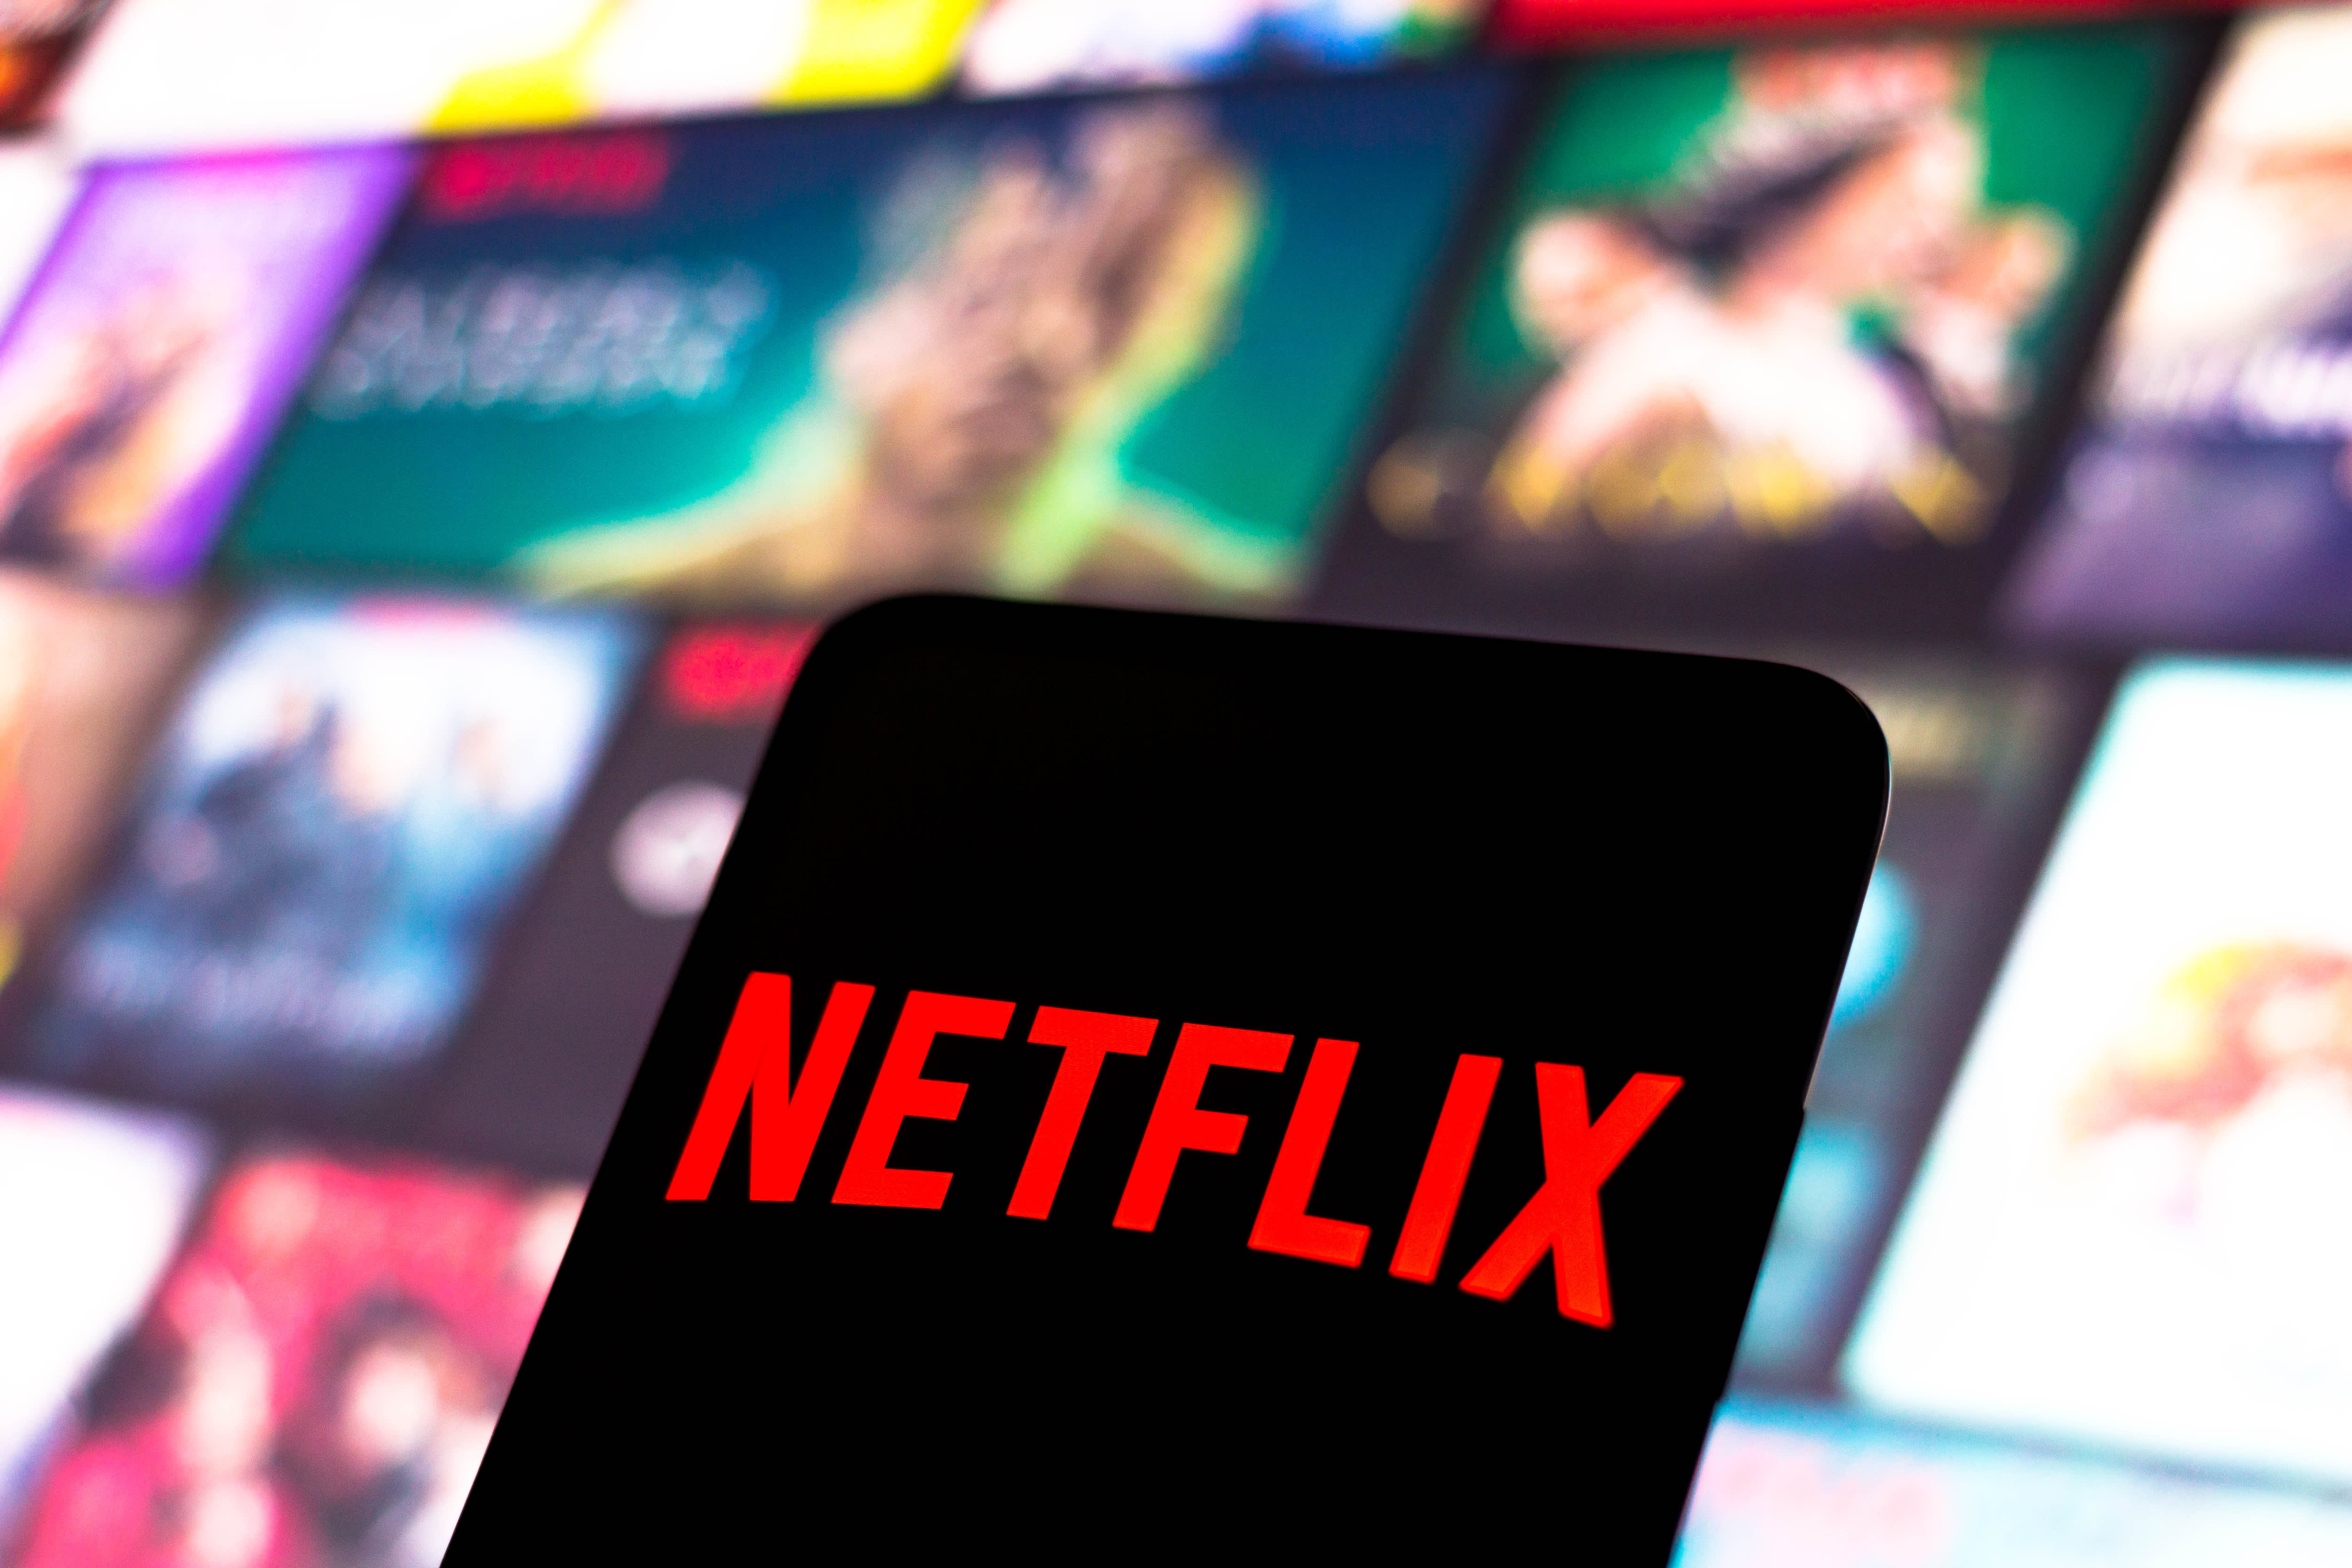 Netflix's New Attempt to Gain Subscribers, Build Theme Parks